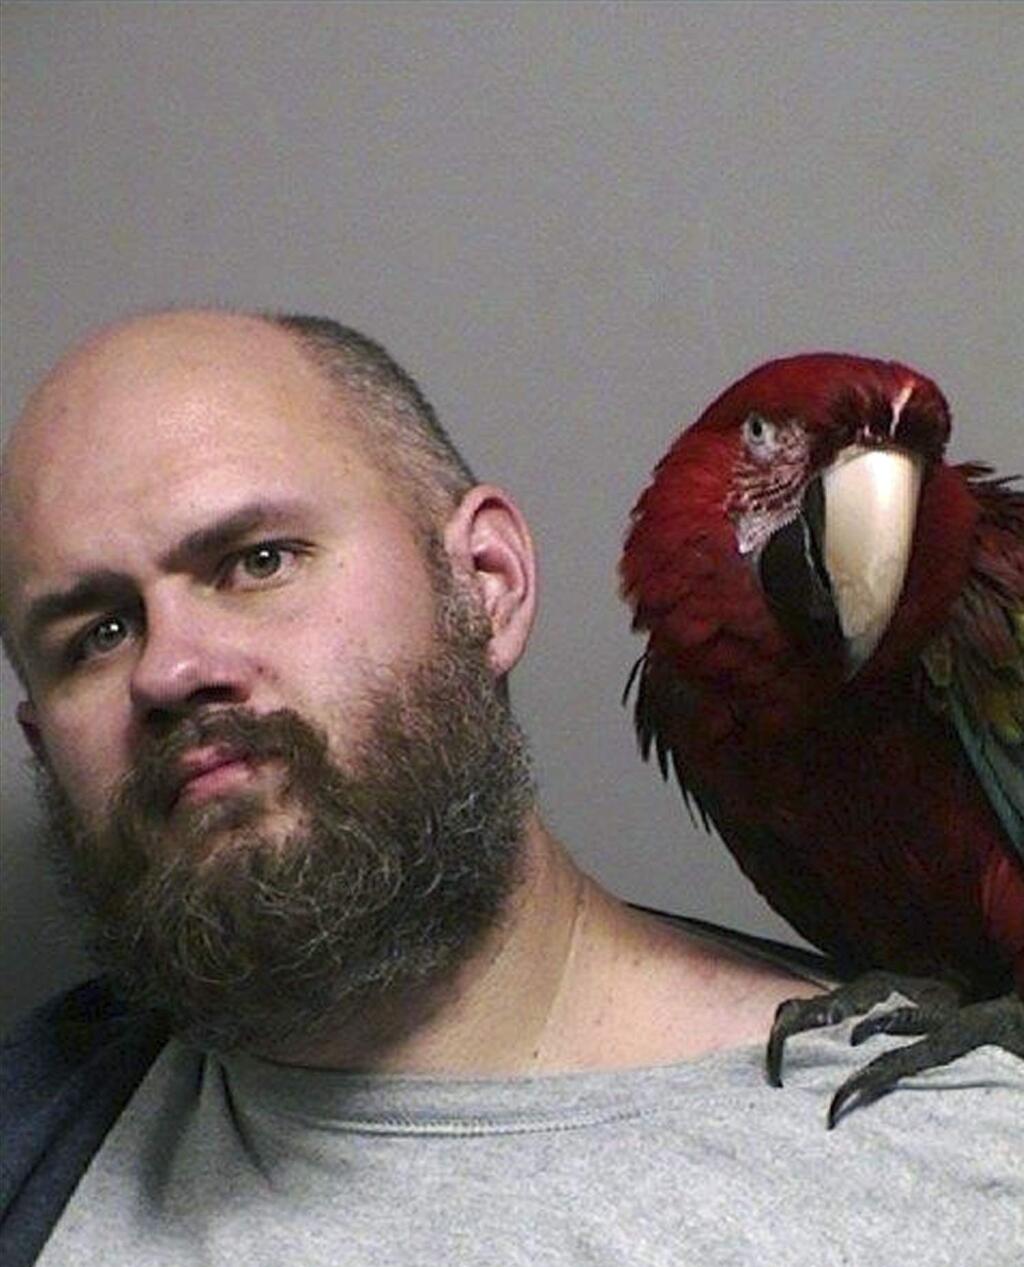 This booking photo provided by the Washington County Sheriff's office taken in Hillsboro, Ore., Thursday, Dec. 1, 2016, shows Craig Buckner with his macaw, named 'Bird.' The 4-year-old macaw became an instant celebrity after appearing in the booking mug shot with his unfortunate owner. (Multnomah County Sheriff's Office via AP)